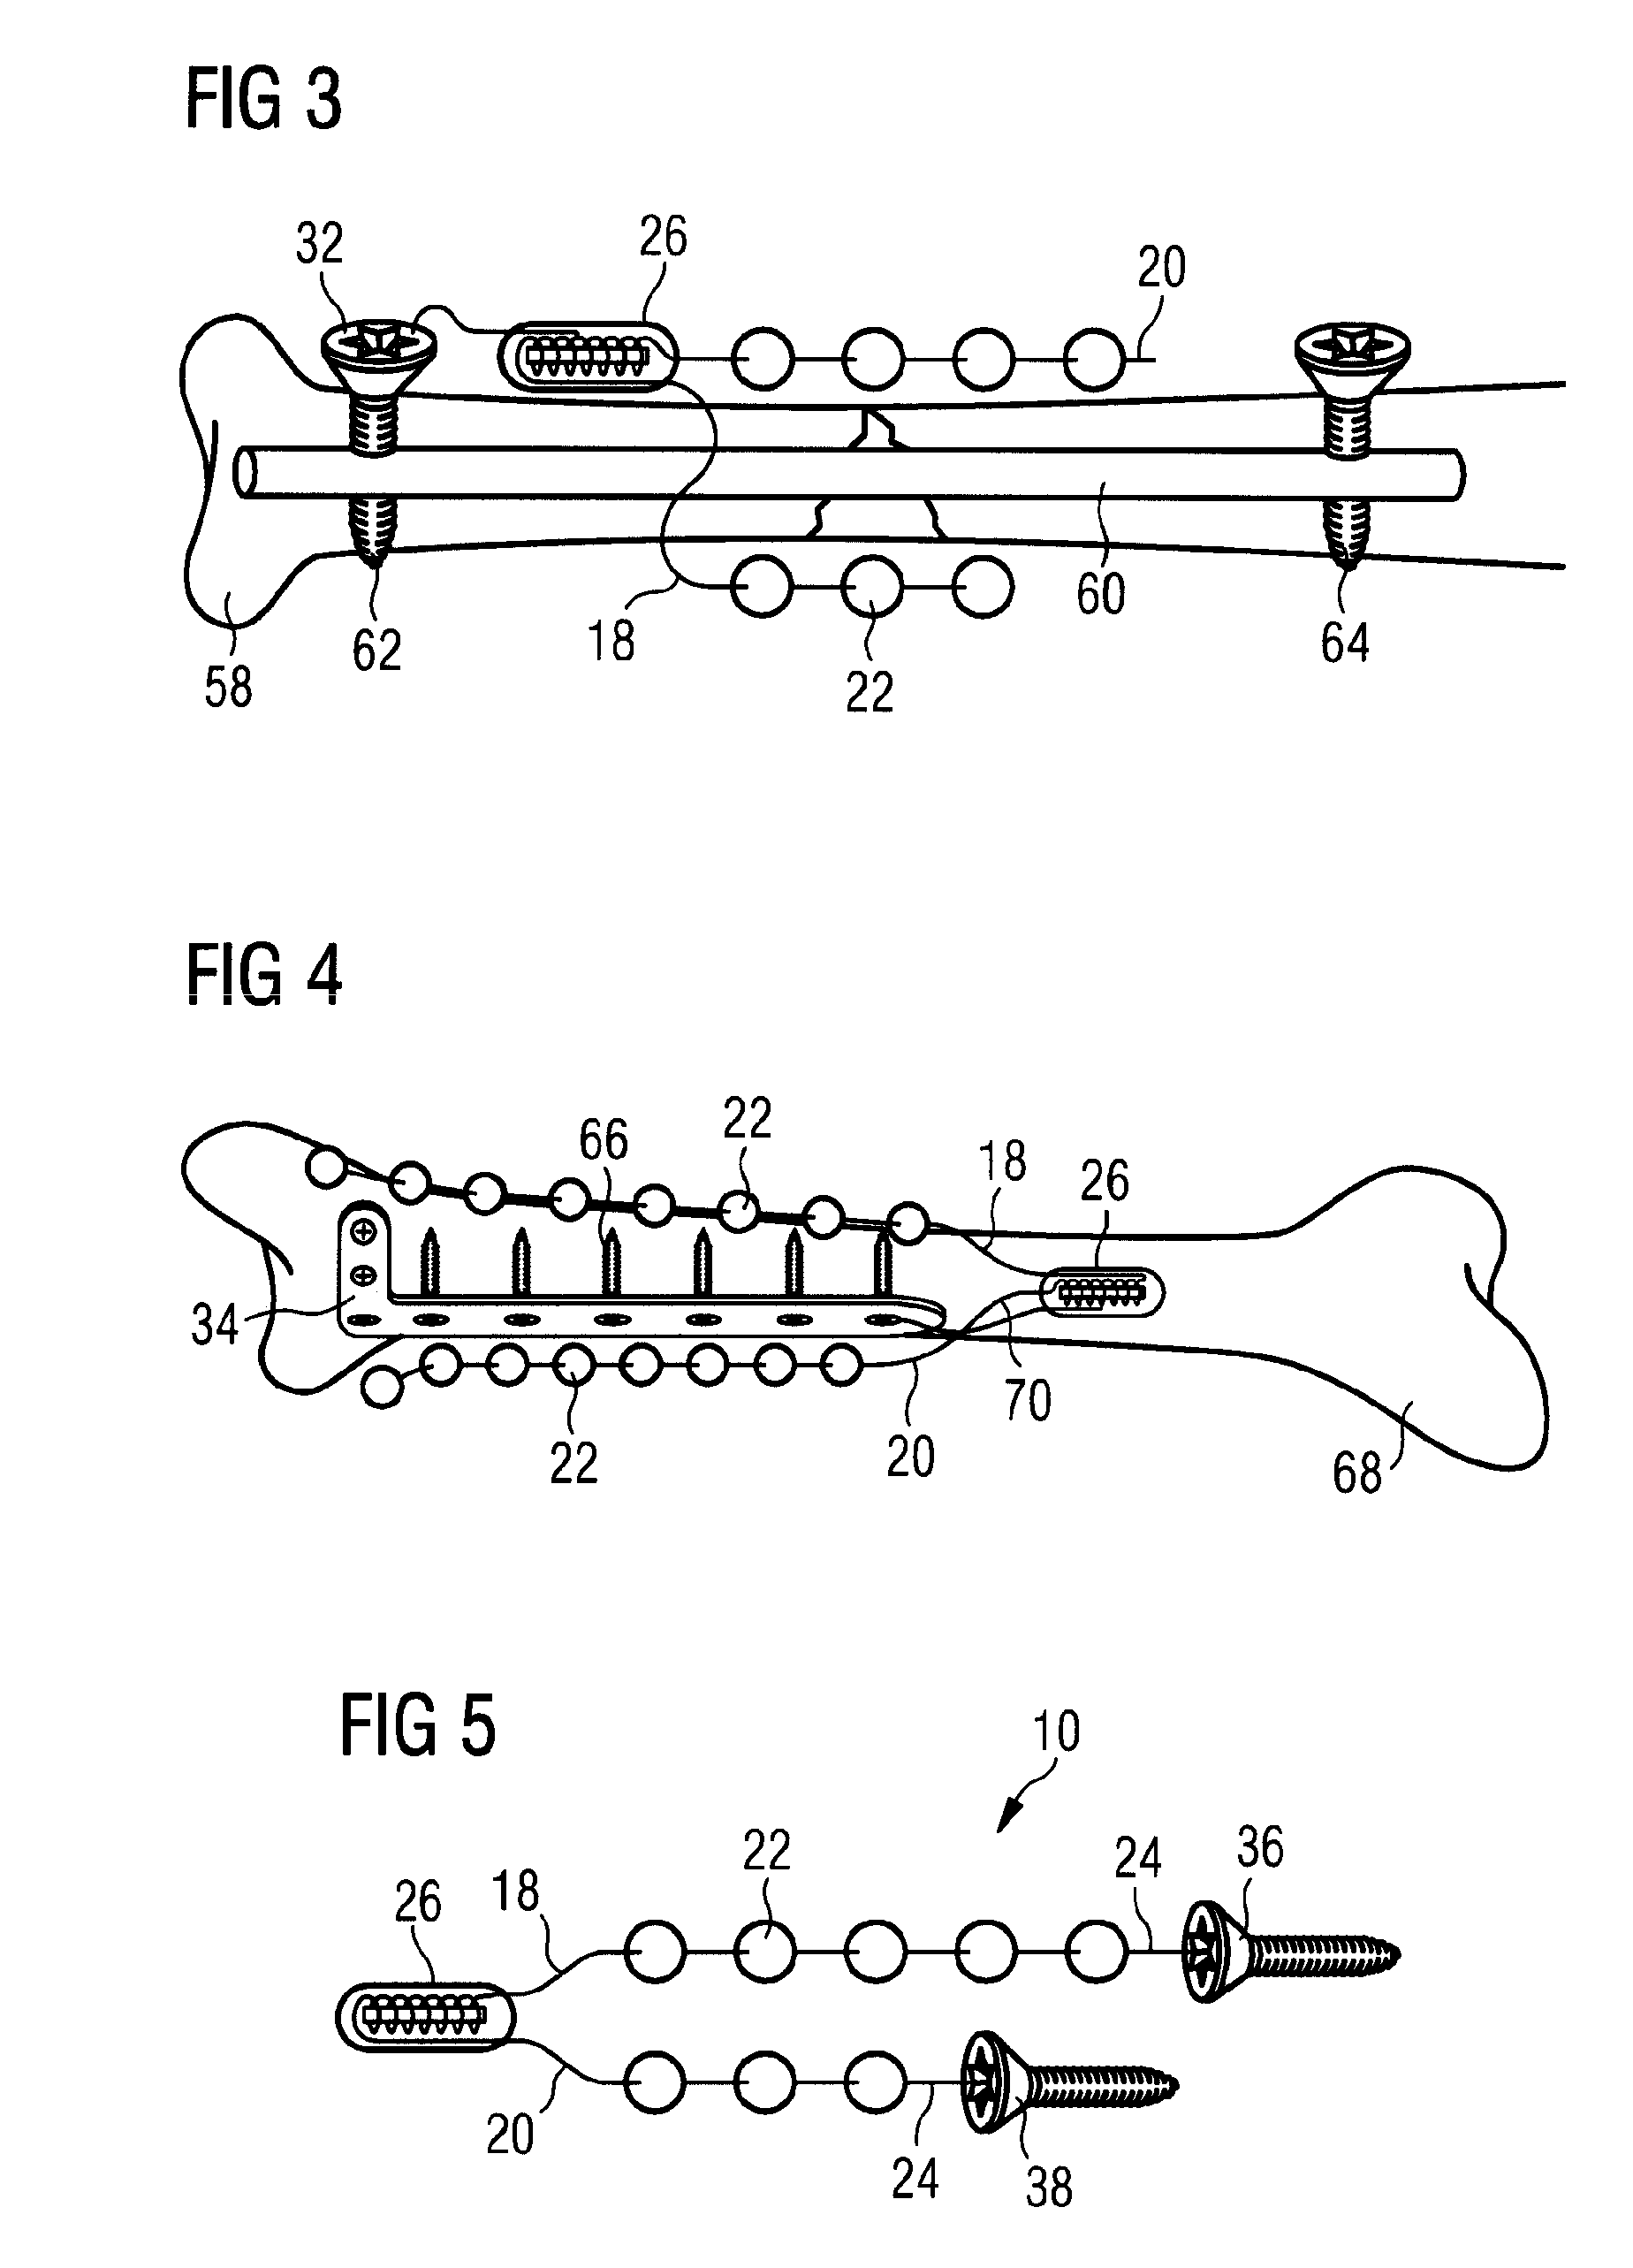 Device for Administering Drugs and for Influencing the Effects of Drugs